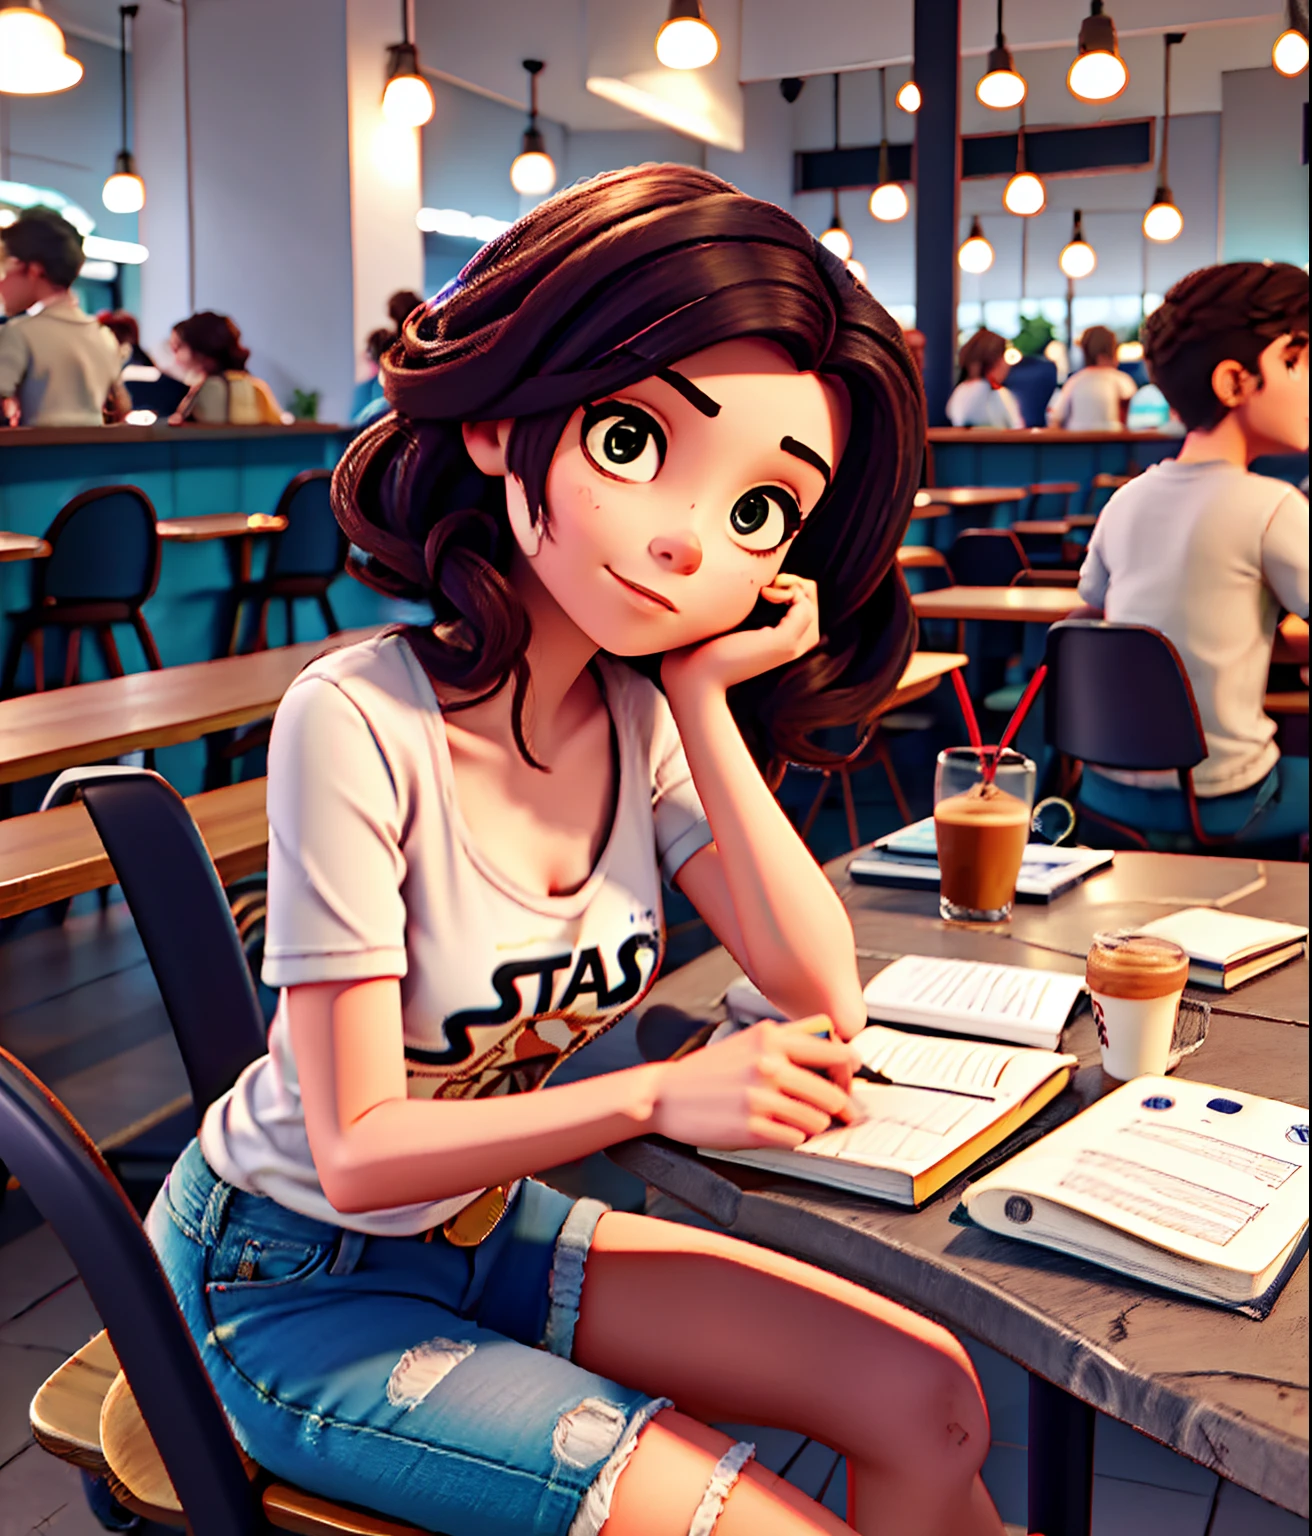 Brazilian woman long light brown hair, eyes browns, wearing Star Wars t-shirt, short jeans e ALL star preto. Drinking coffee and writing in a notebook. Buenos Aires Cafeteria Scenery, European style.